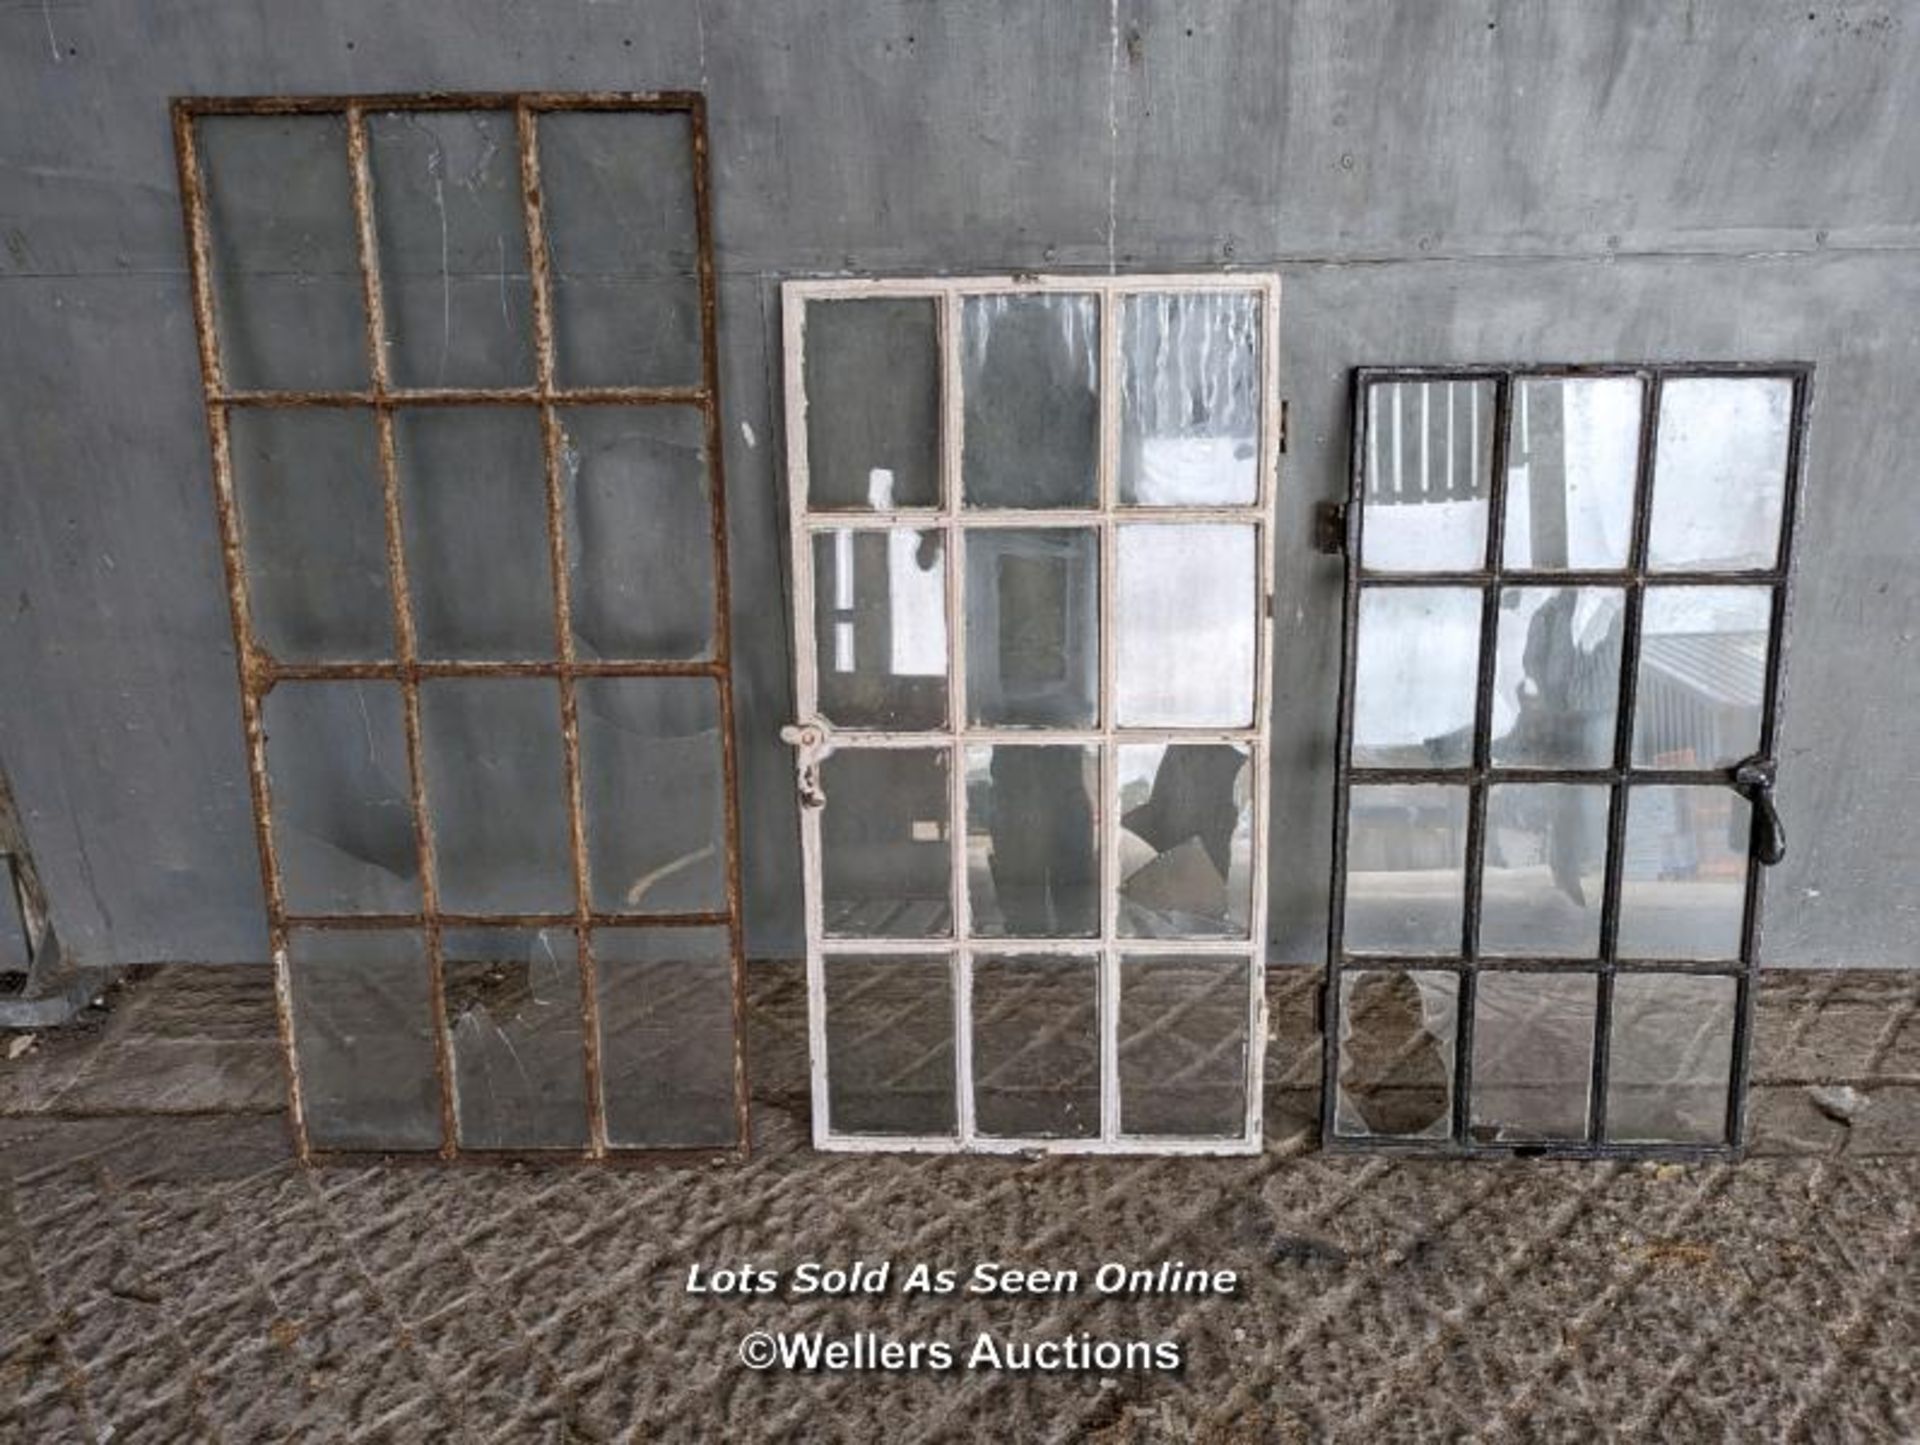 3 late Georgian/Early Victorian cast iron window with square glazing panels. For restoration.